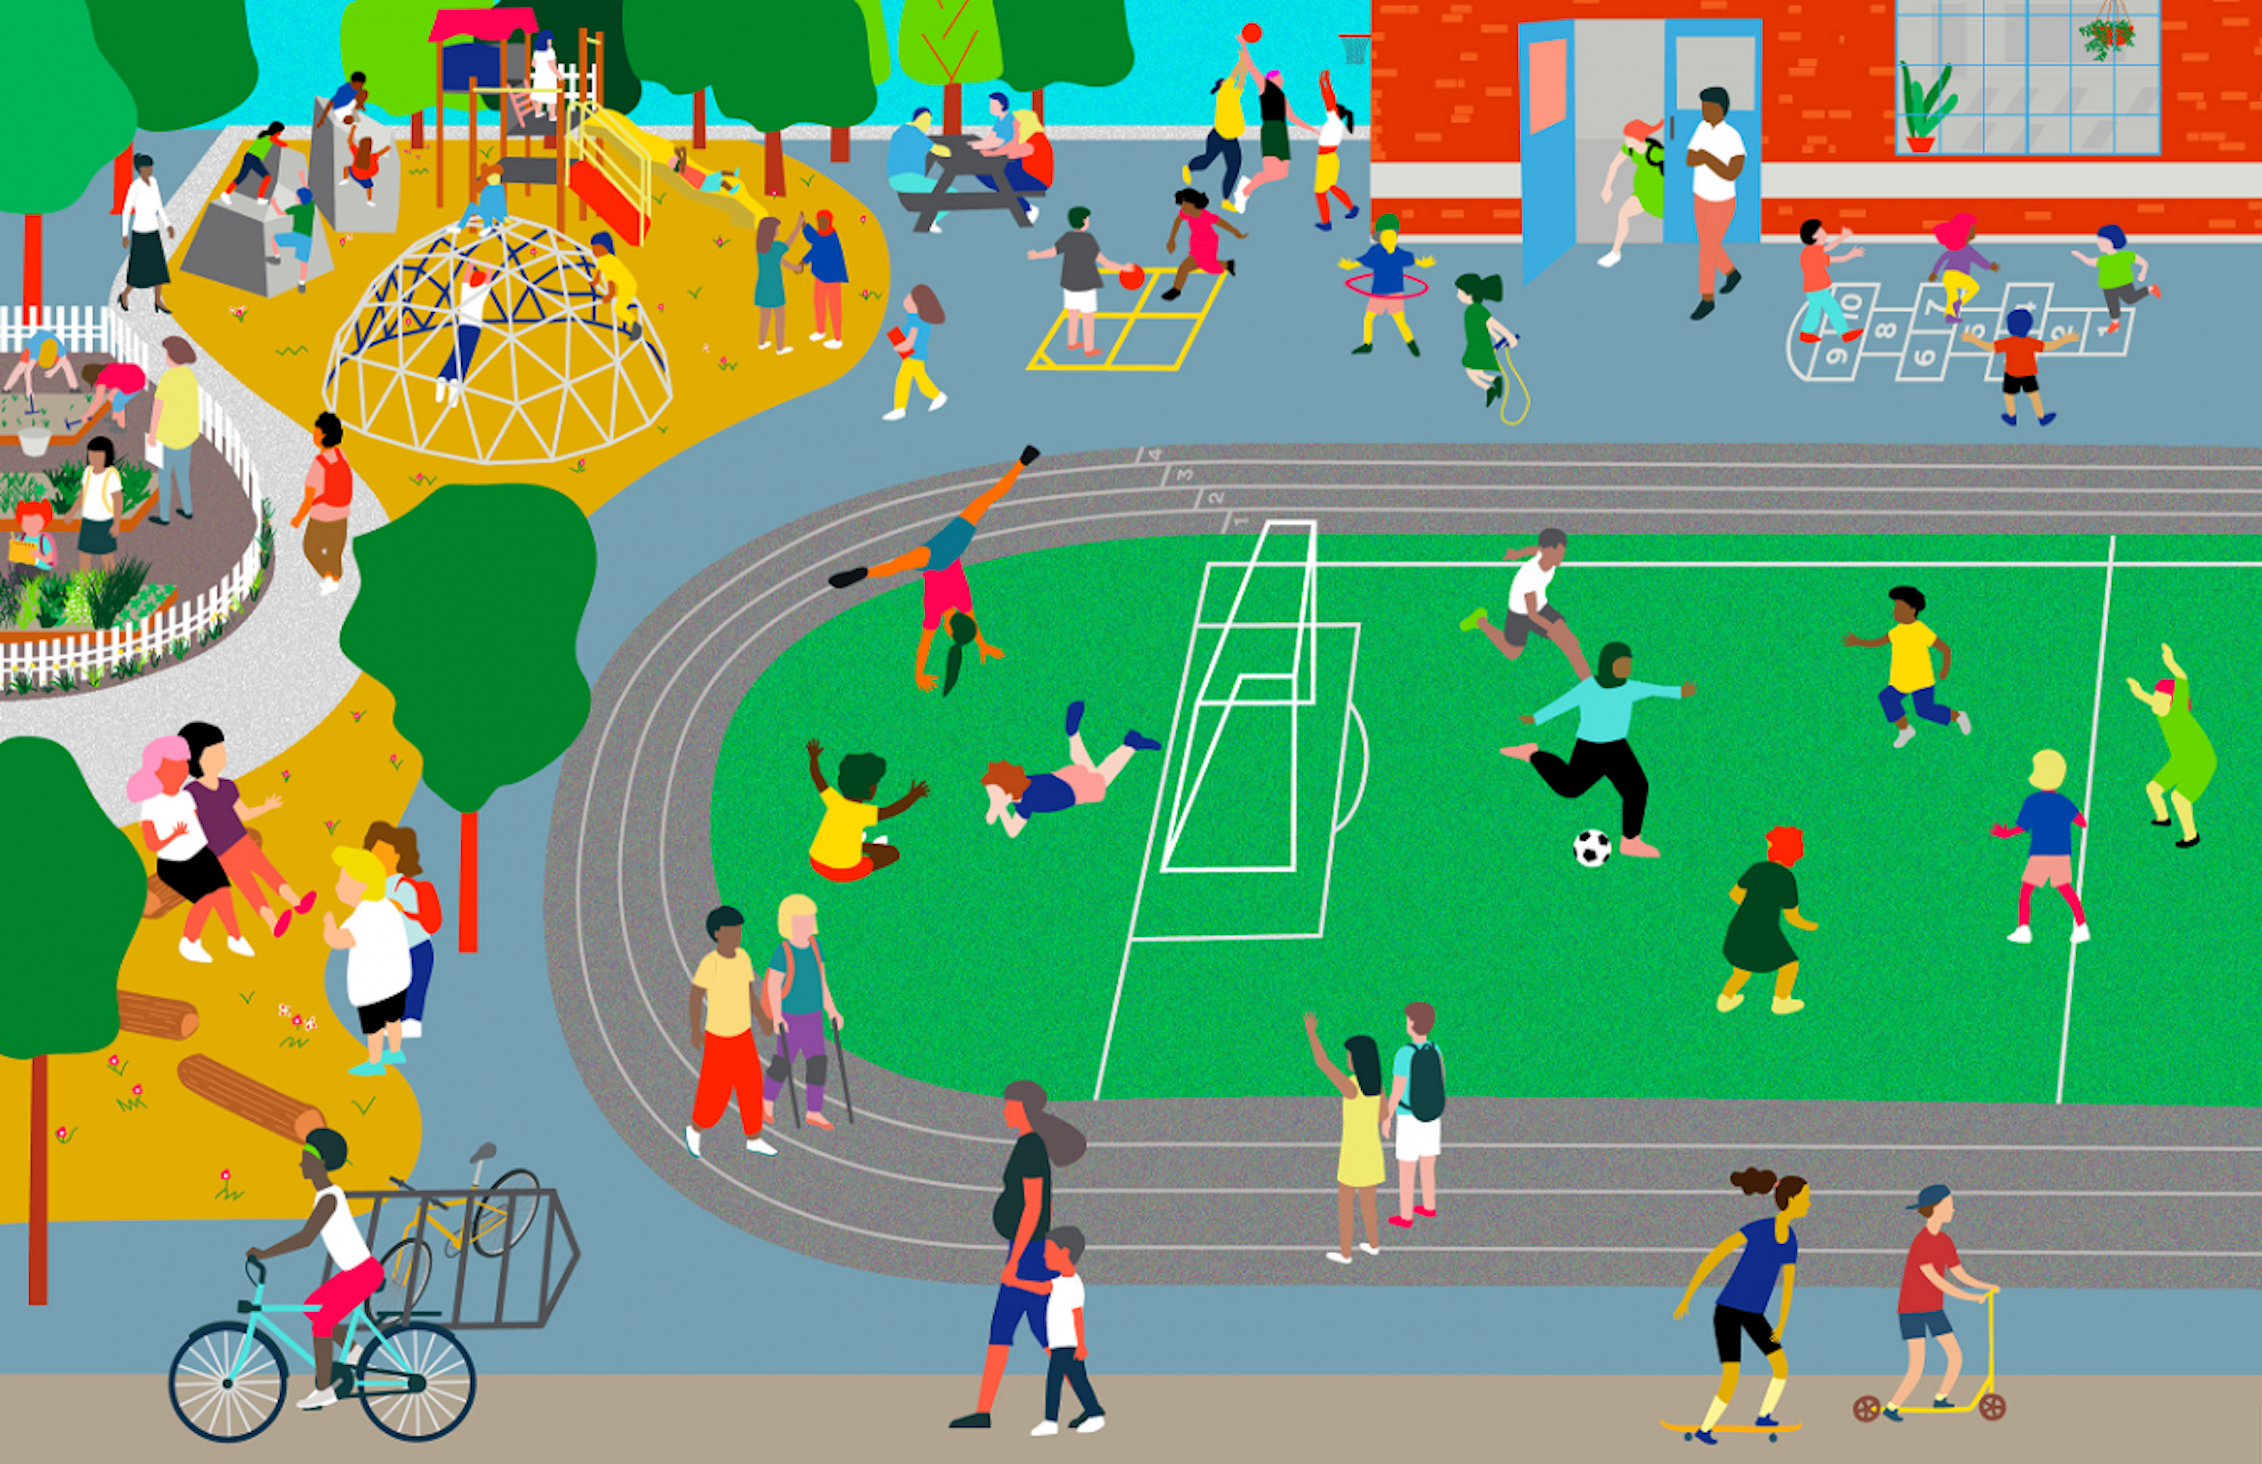 Illustration of a vibrant schoolyard, showing diverse students playing on a field, a play structure, and with a garden area.